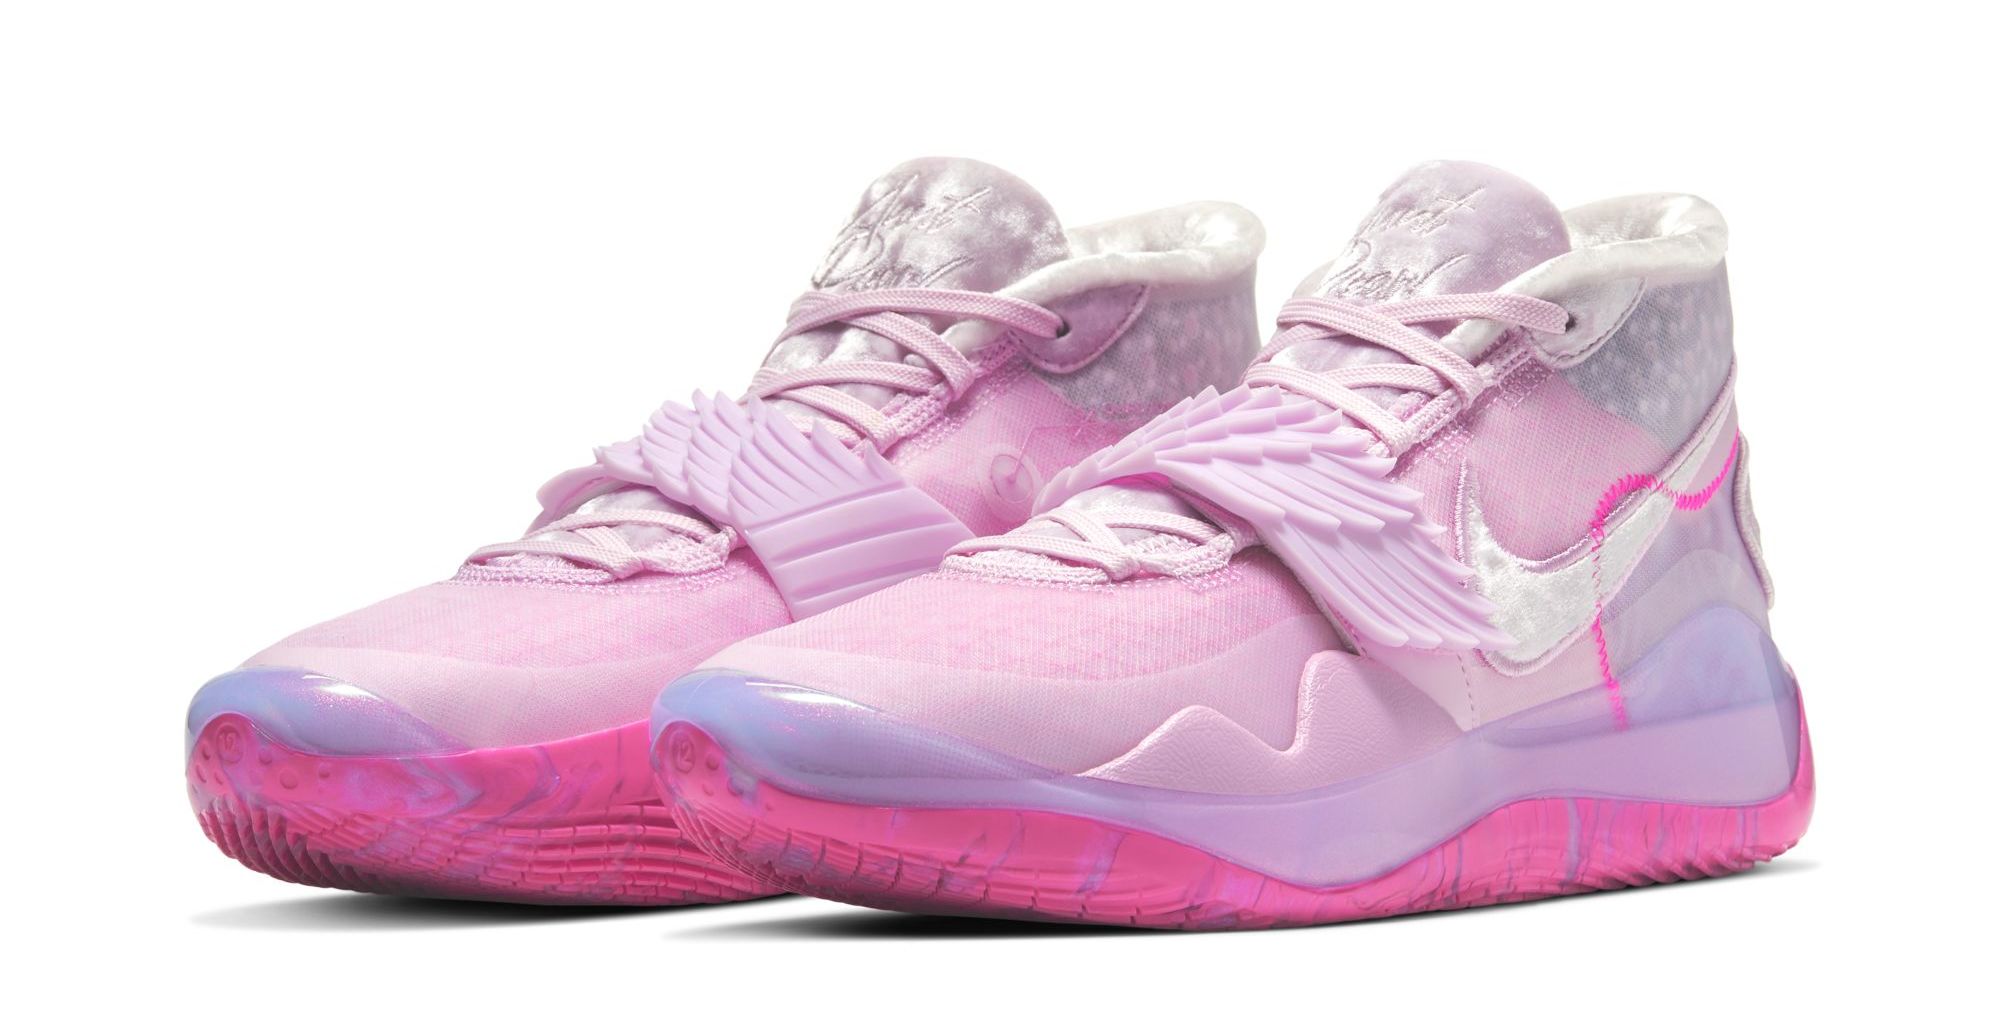 aunt pearl shoes